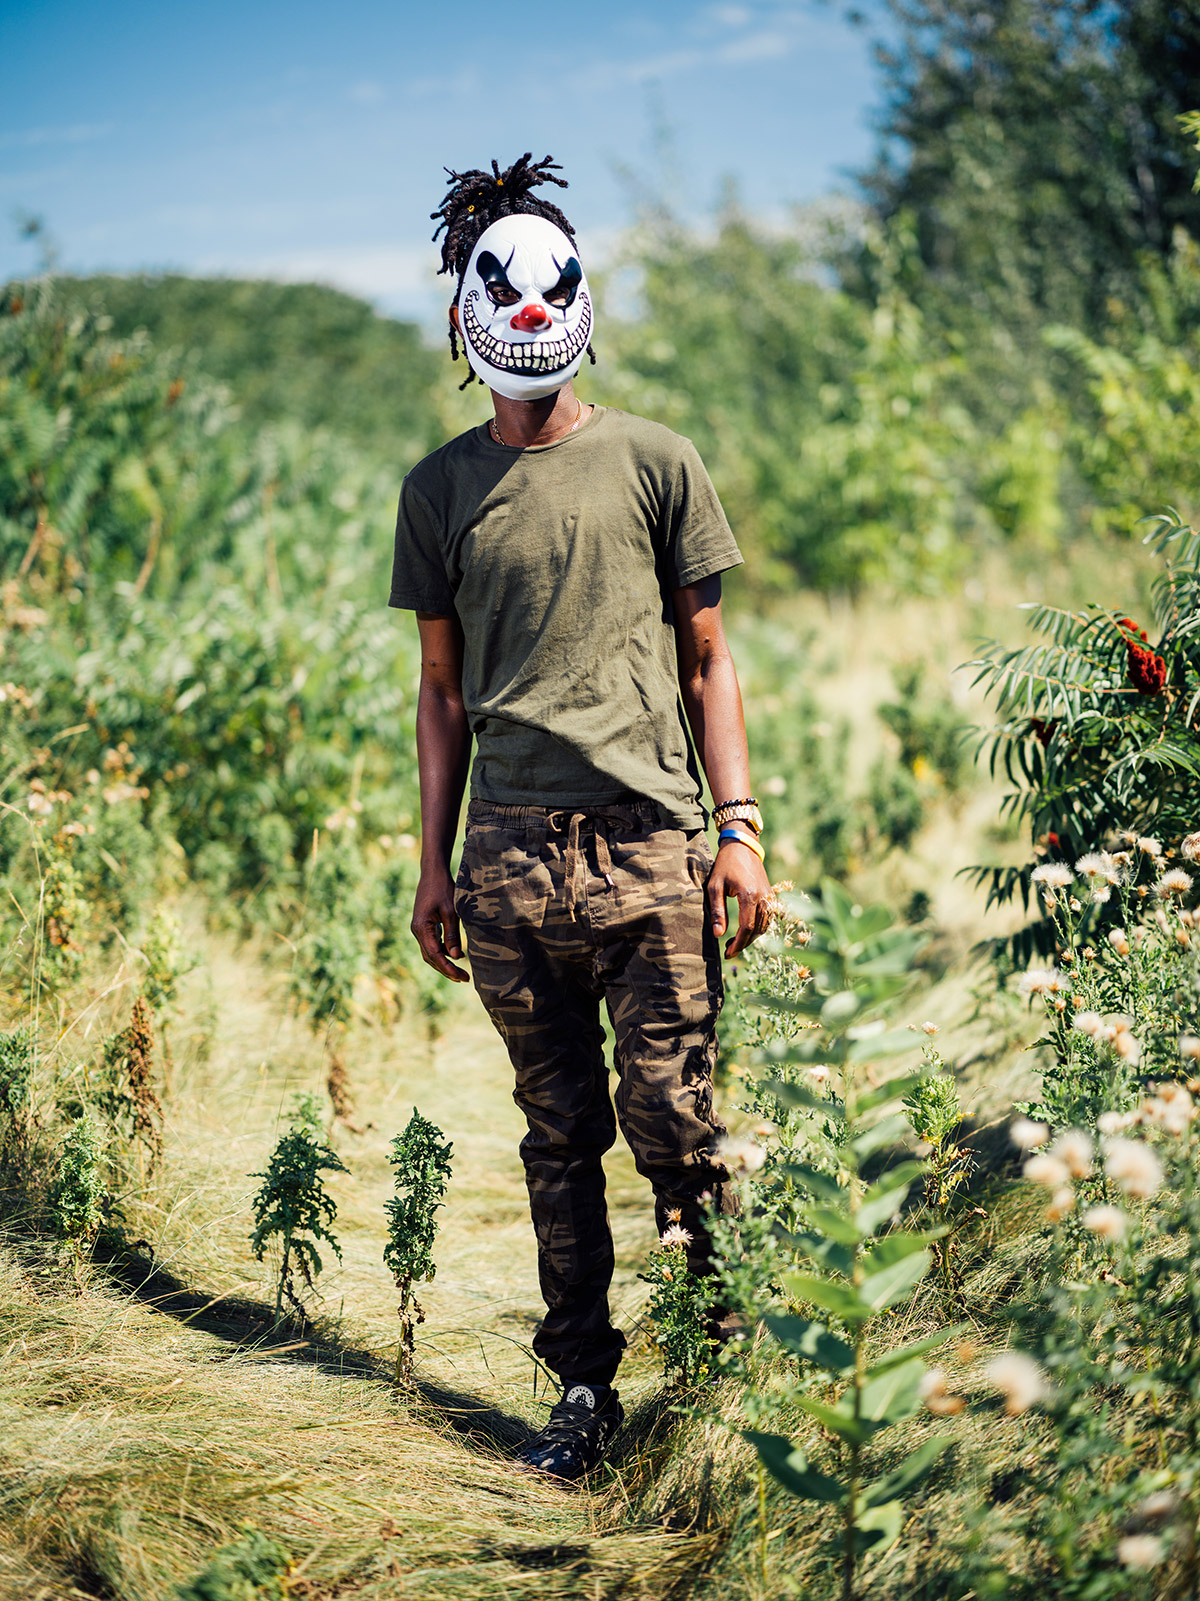 Photo of a teenage boy standing among trees and bushes wearing a green t-shirt and camo pants. His hair is in dreadlocks and tied up on top of his head. He is wearing a clown mask with a wide, curling, toothy smile.